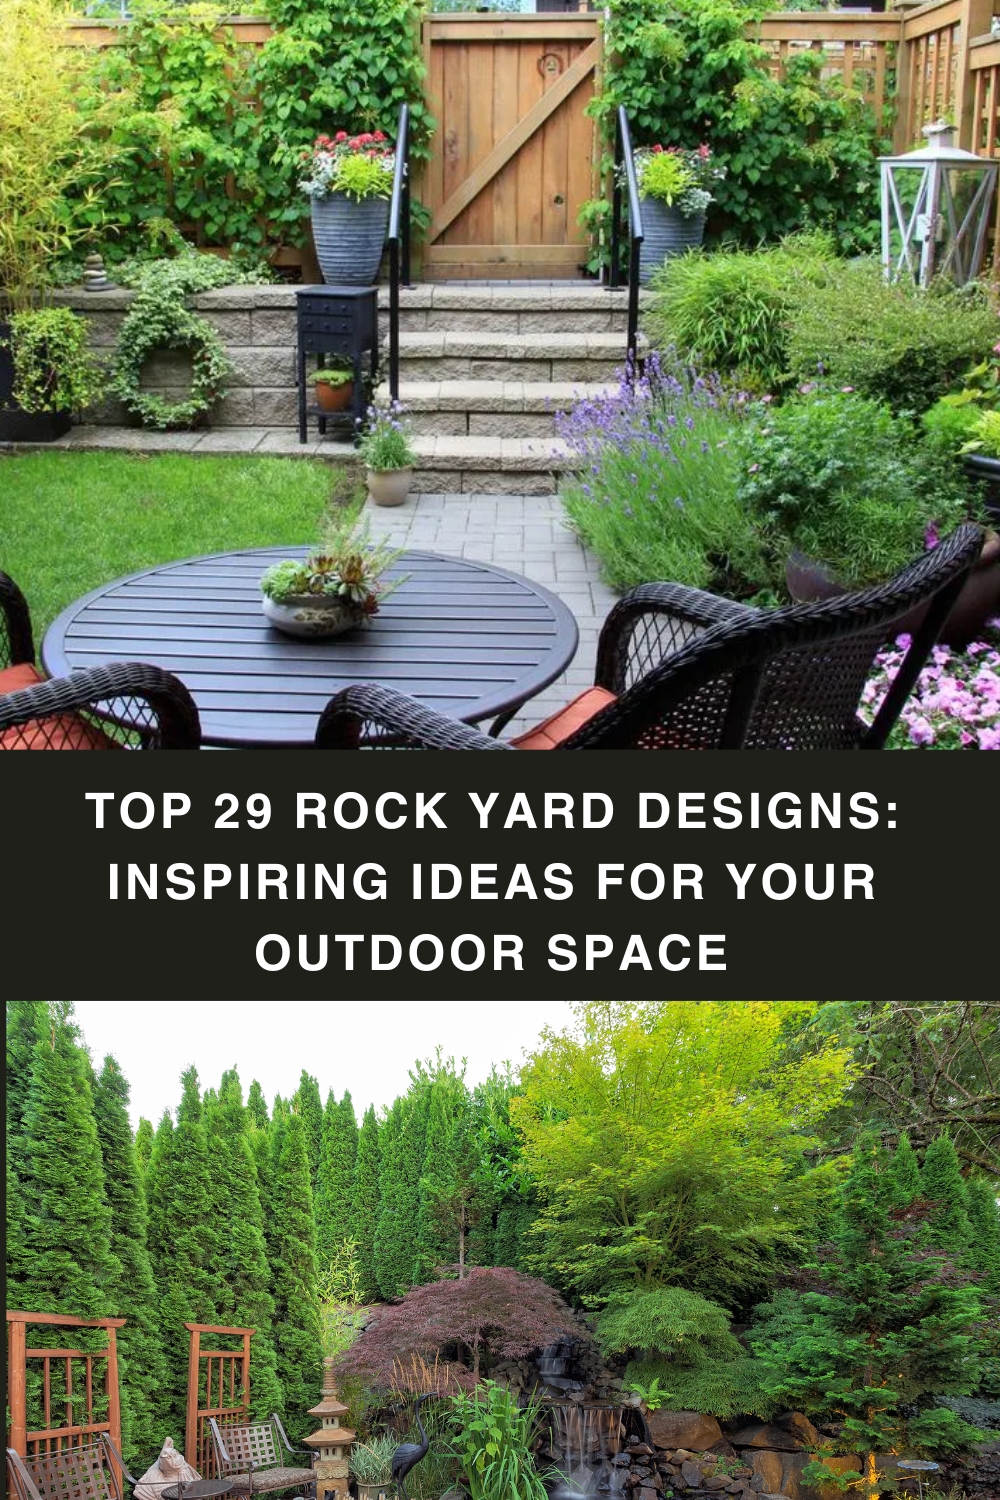 Top 29 Rock Yard Designs: Inspiring Ideas for Your Outdoor Space pin